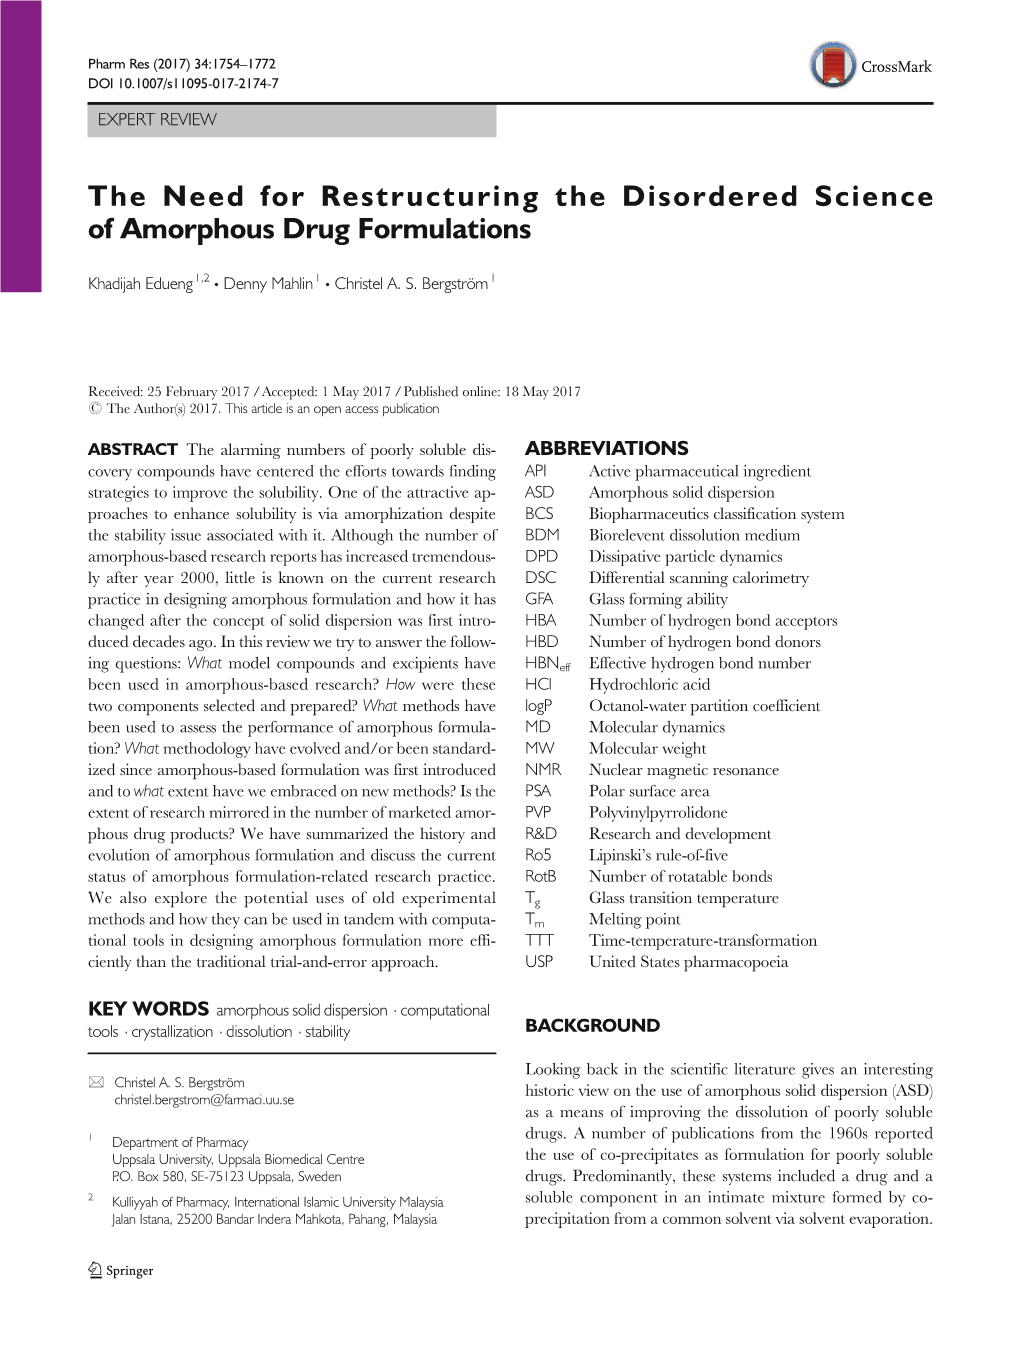 The Need for Restructuring the Disordered Science of Amorphous Drug Formulations